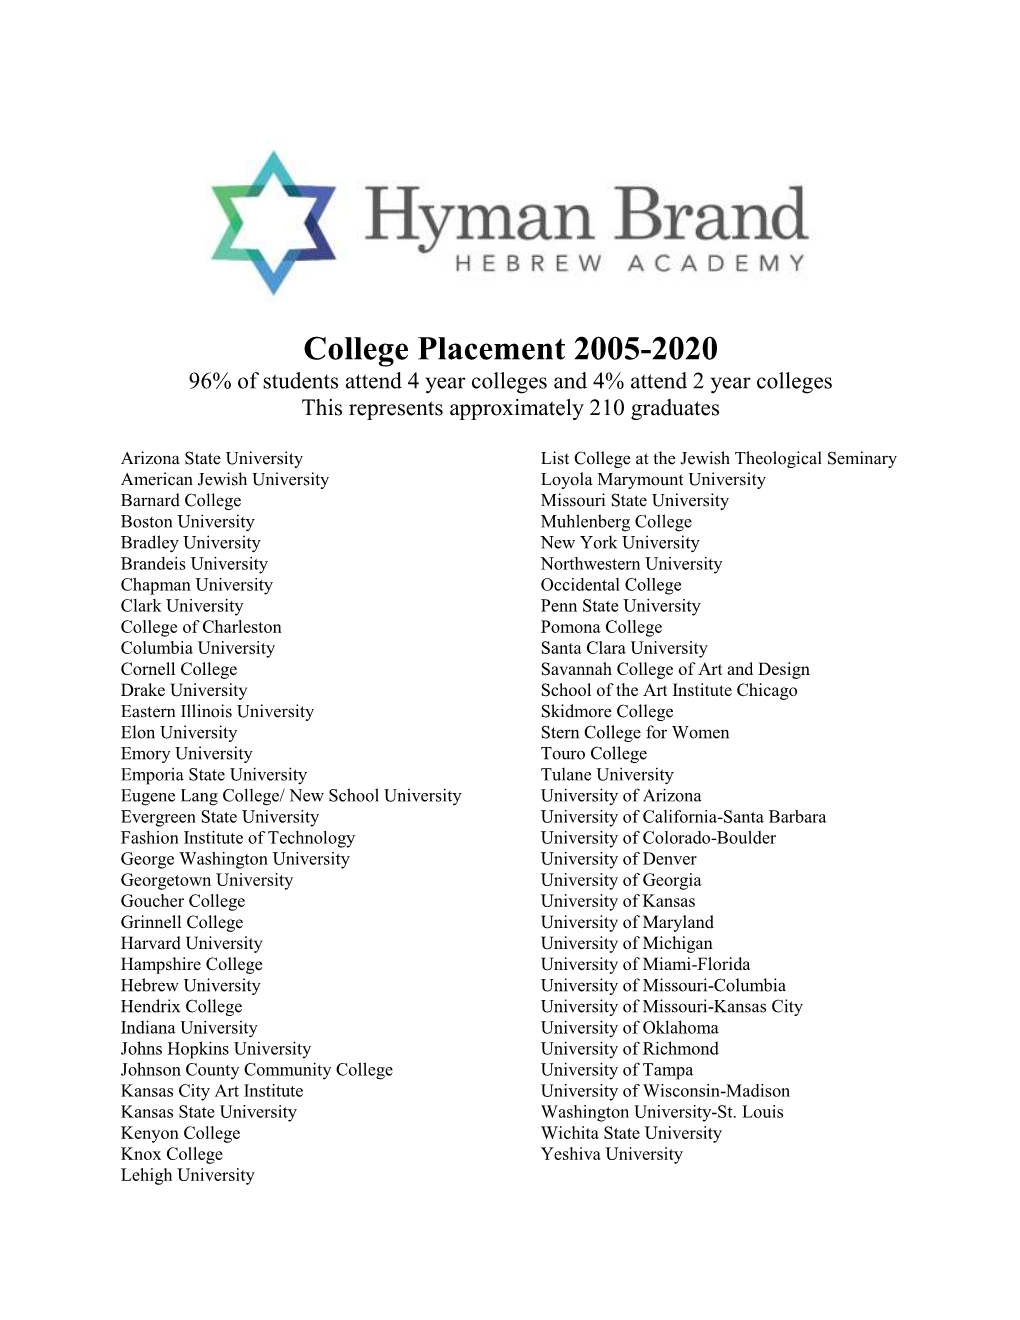 College Placement 2005-2020 96% of Students Attend 4 Year Colleges and 4% Attend 2 Year Colleges This Represents Approximately 210 Graduates